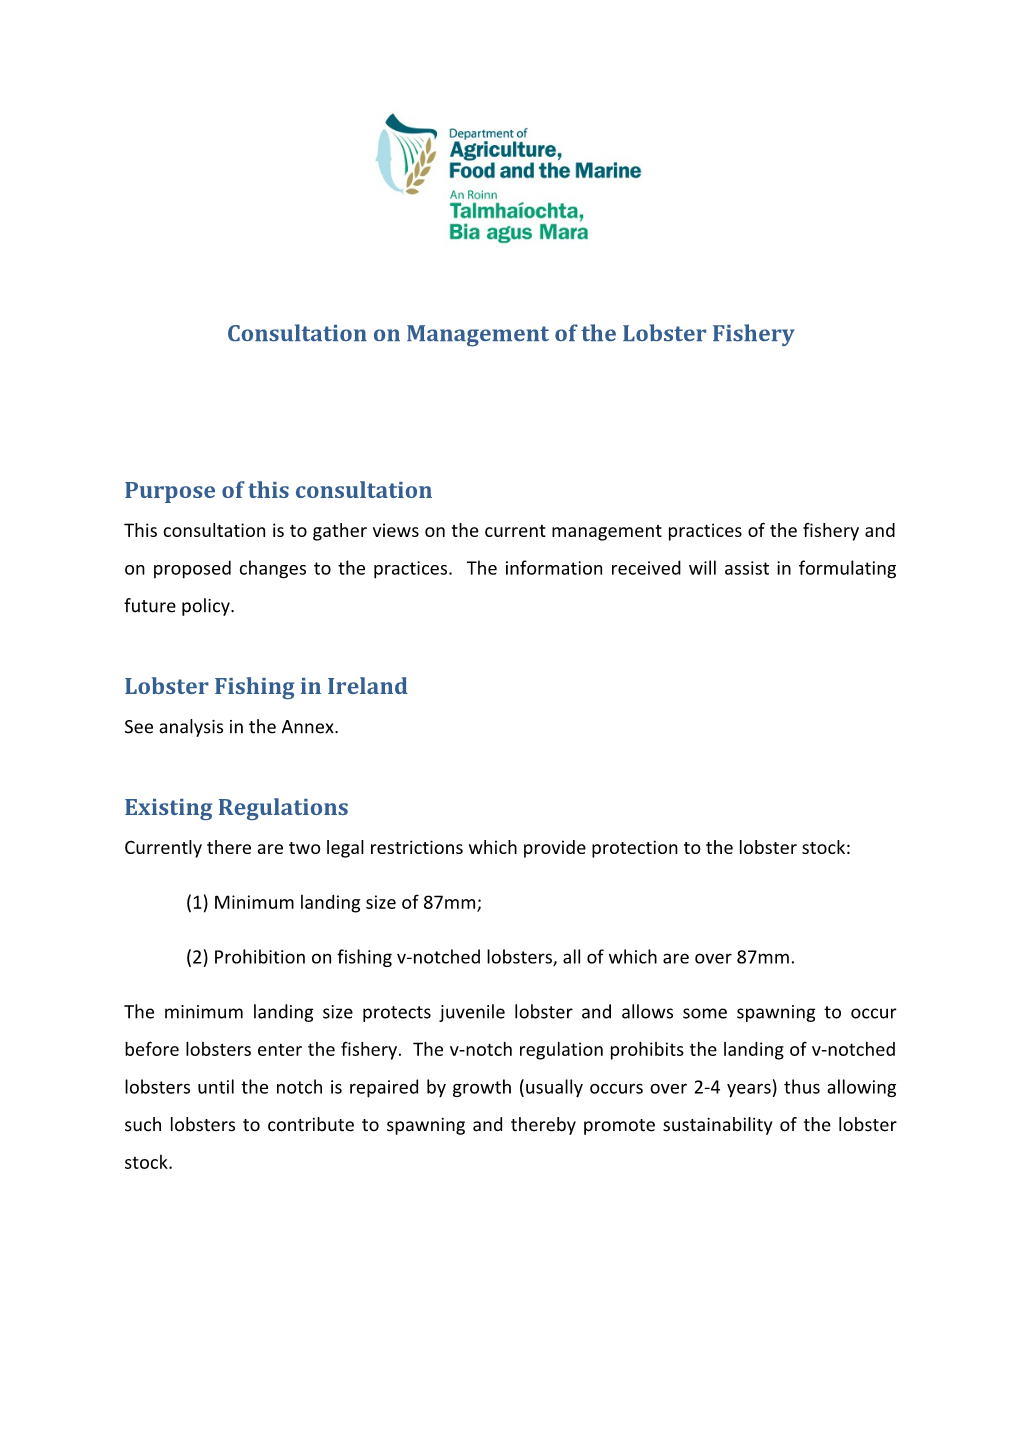 Consultation on Management of the Lobster Fishery